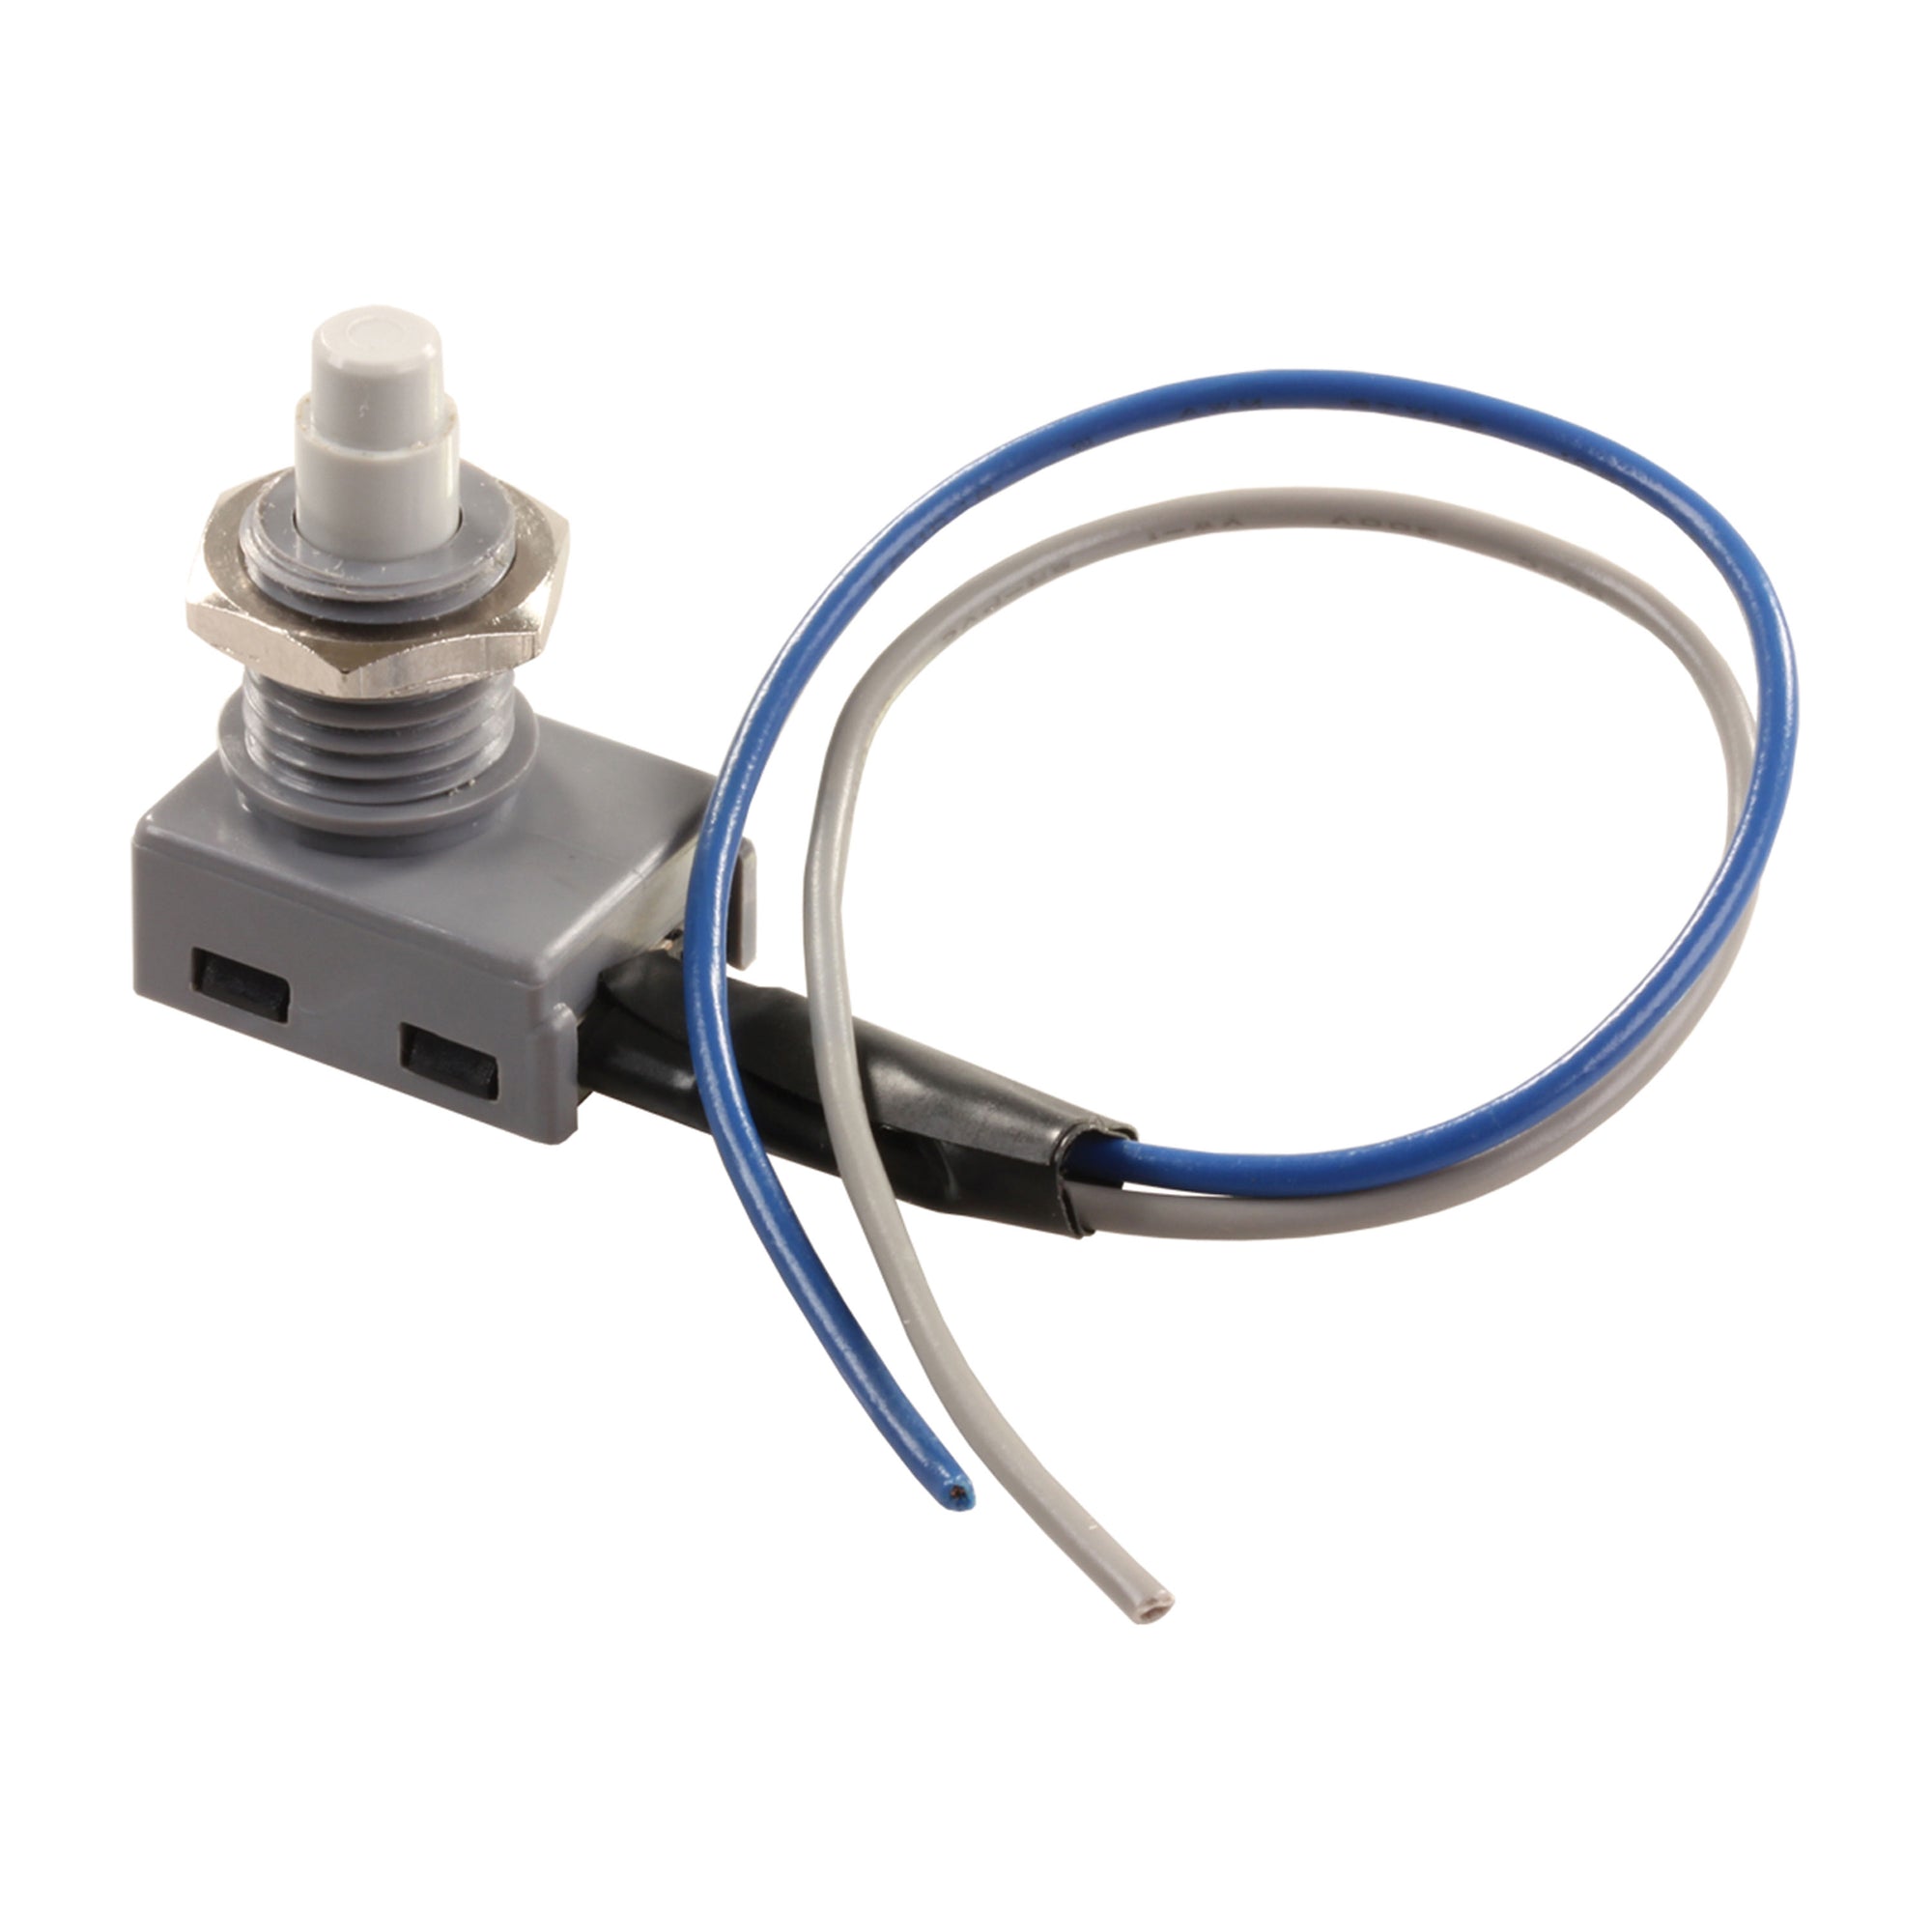 JR Products 13985 Push Button On/Off Switch